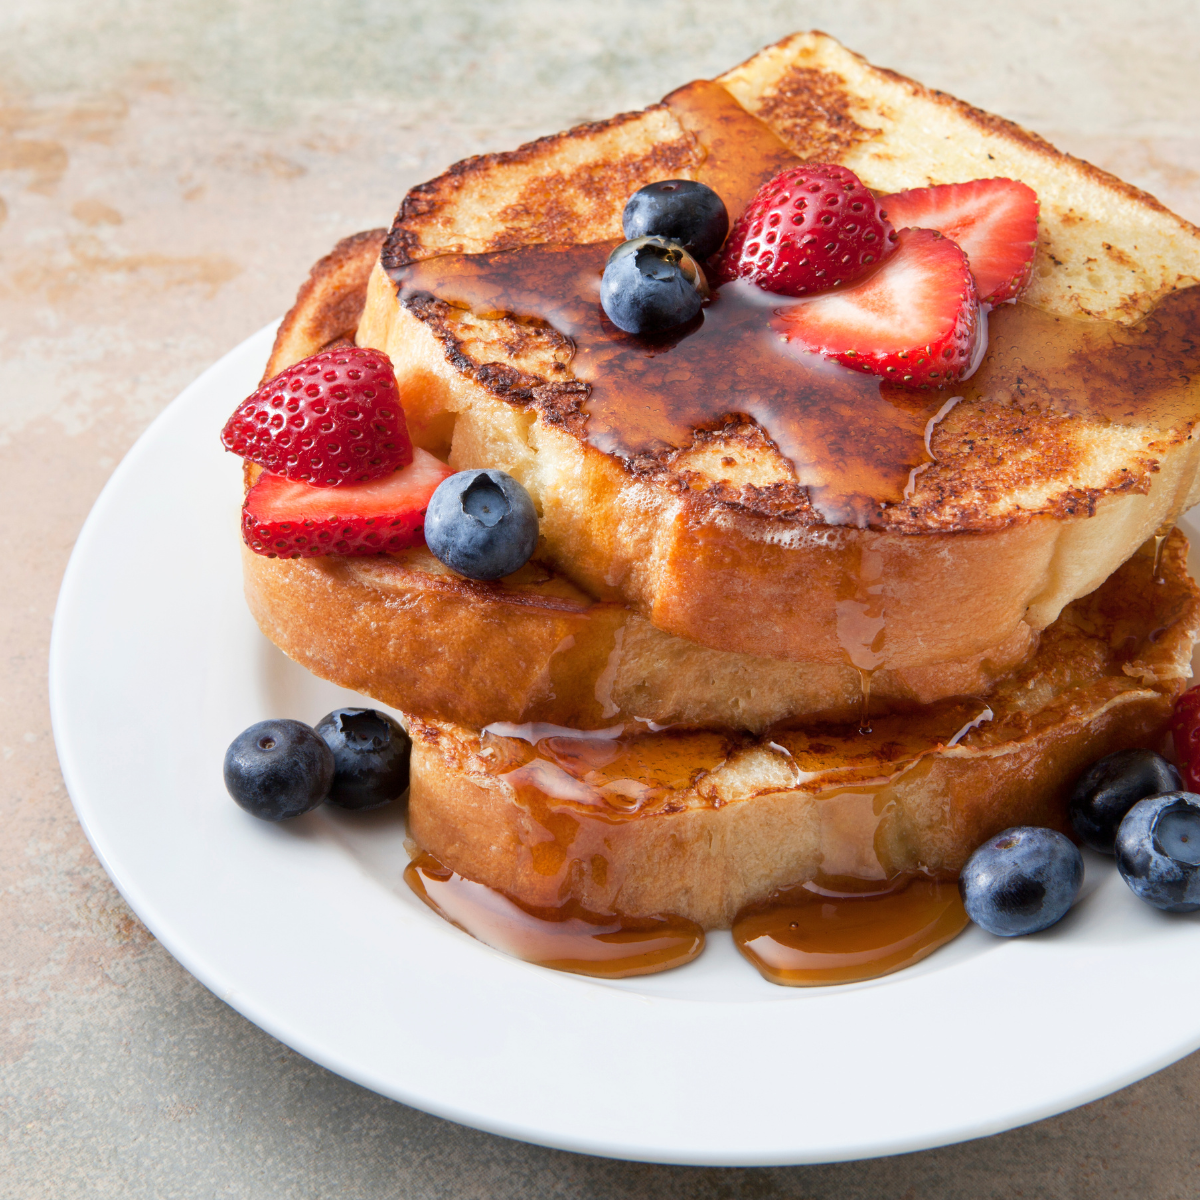 How Long Does French Toast Last in the Fridge --Ah, French toast. We all know the delicious, syrupy goodness it brings. But do you ever think about how long it would last in the fridge? Keeping your French toast fresh and tasty for a longer period is essential for any breakfast aficionado. 